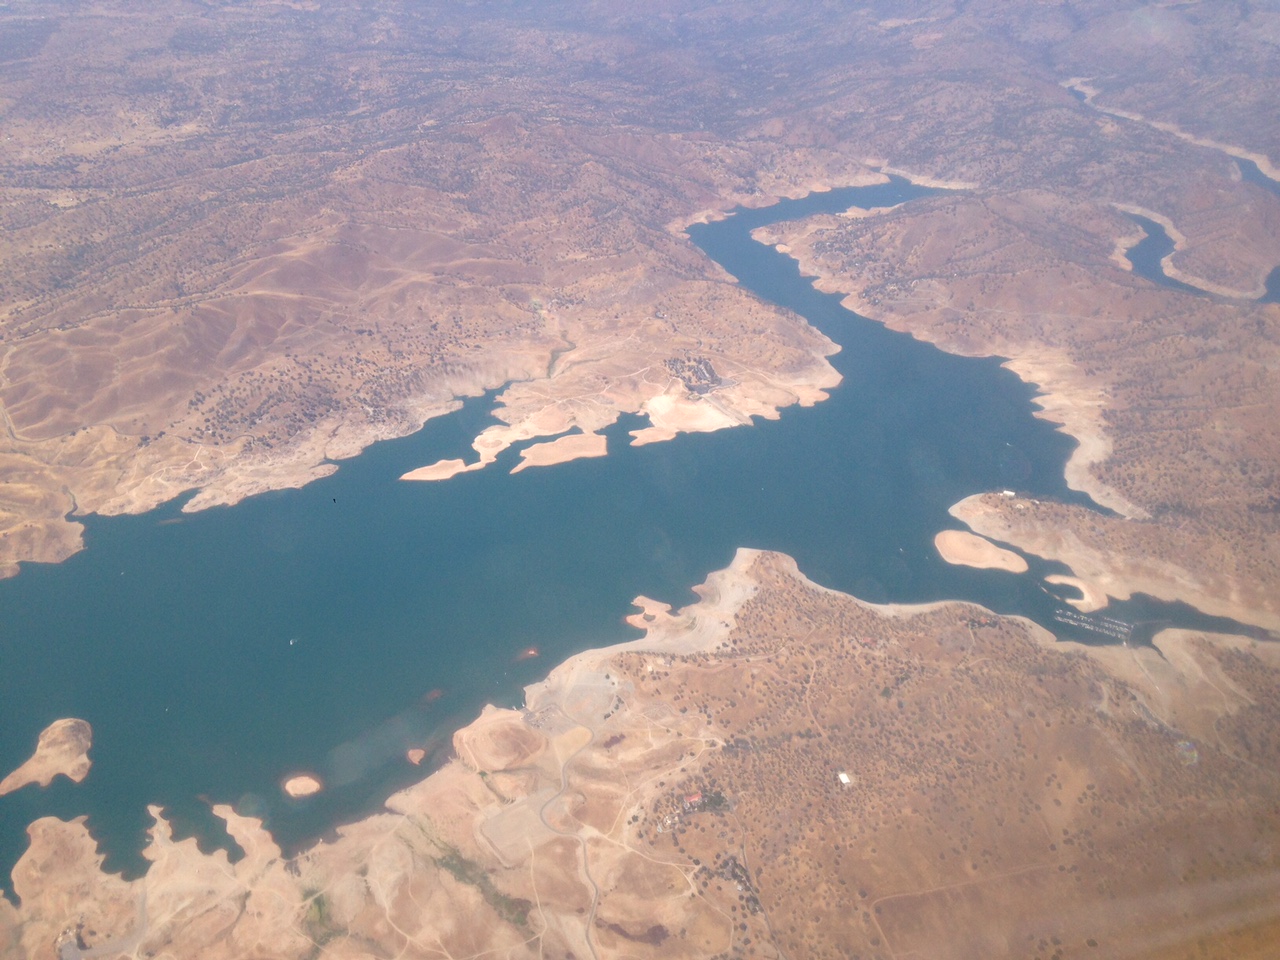 I Flew With NASA To Study The California Drought From The Sky